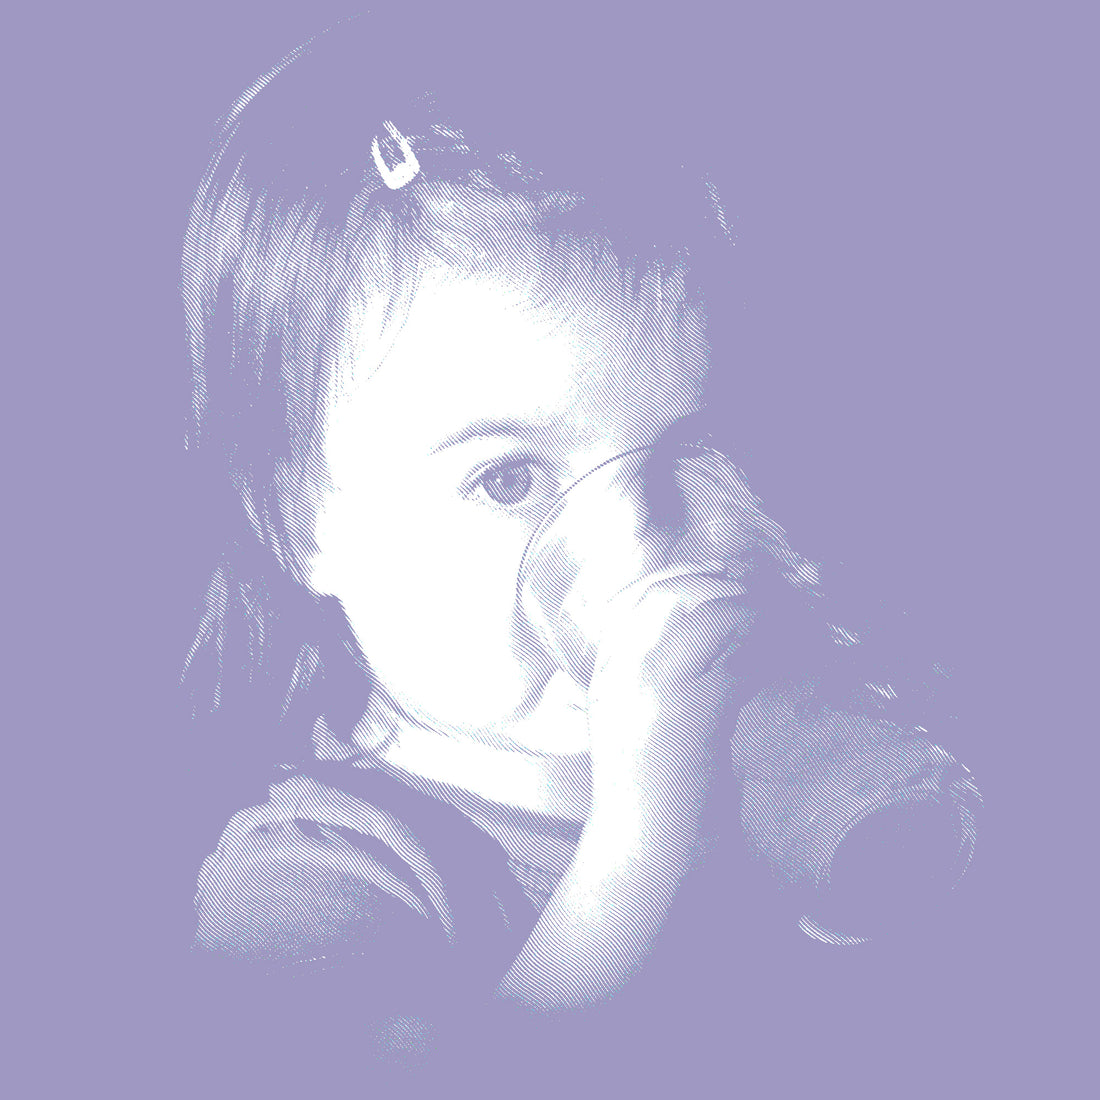 Dehydration in Children and Infants – what to look out for